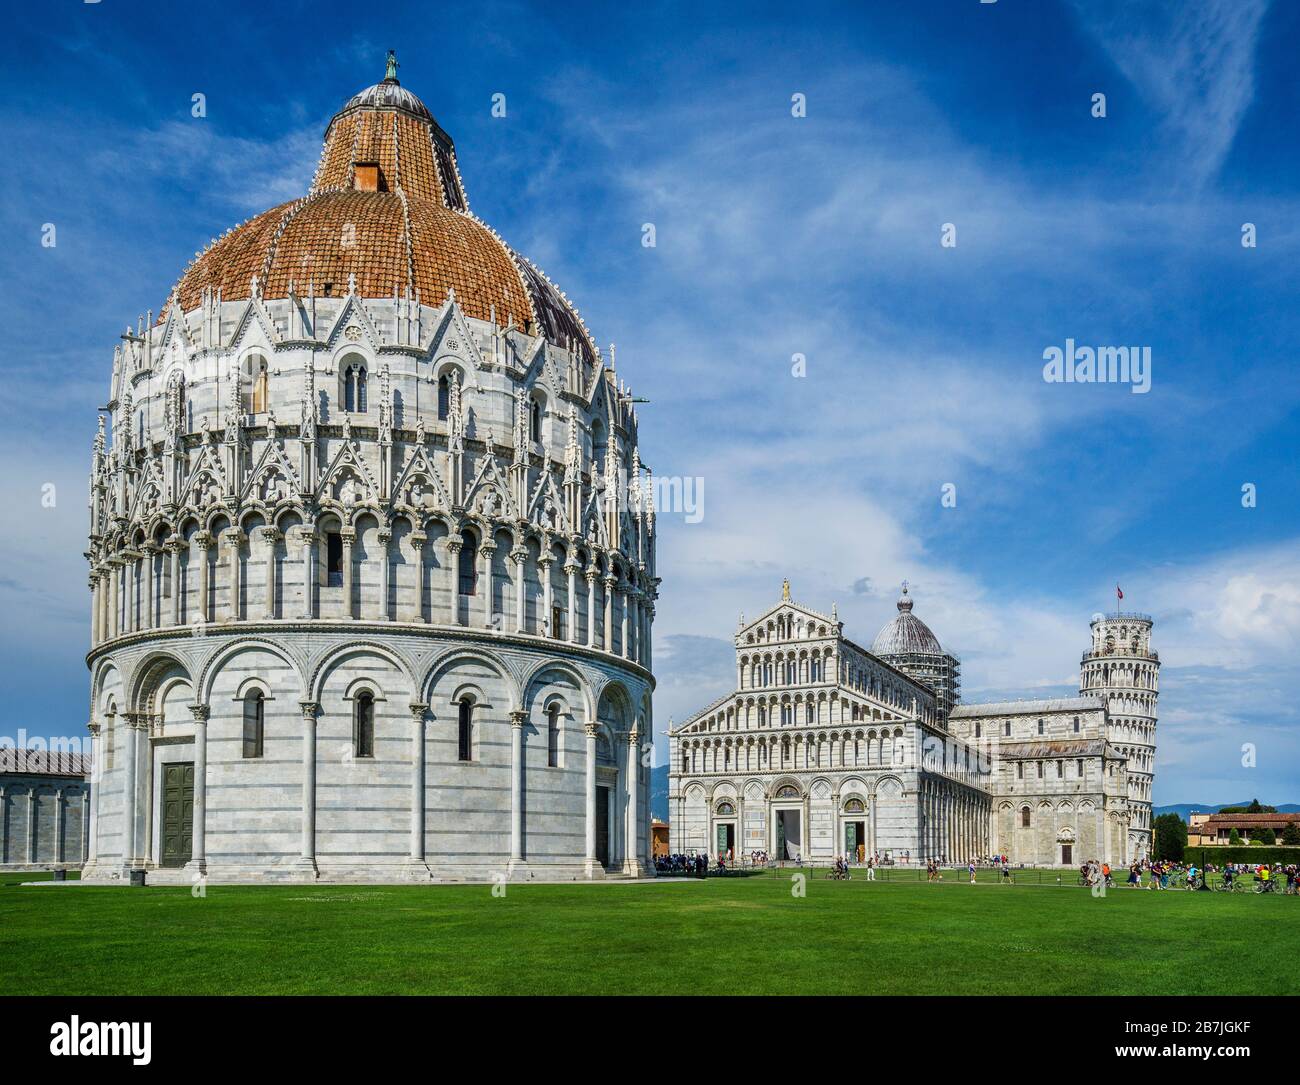 the Pisa Baptistery of St. John in the Piazza dei Miracoli, near the Duomo di Pisa and the cathedral's free-standing campanile, the famous Leaning Tow Stock Photo